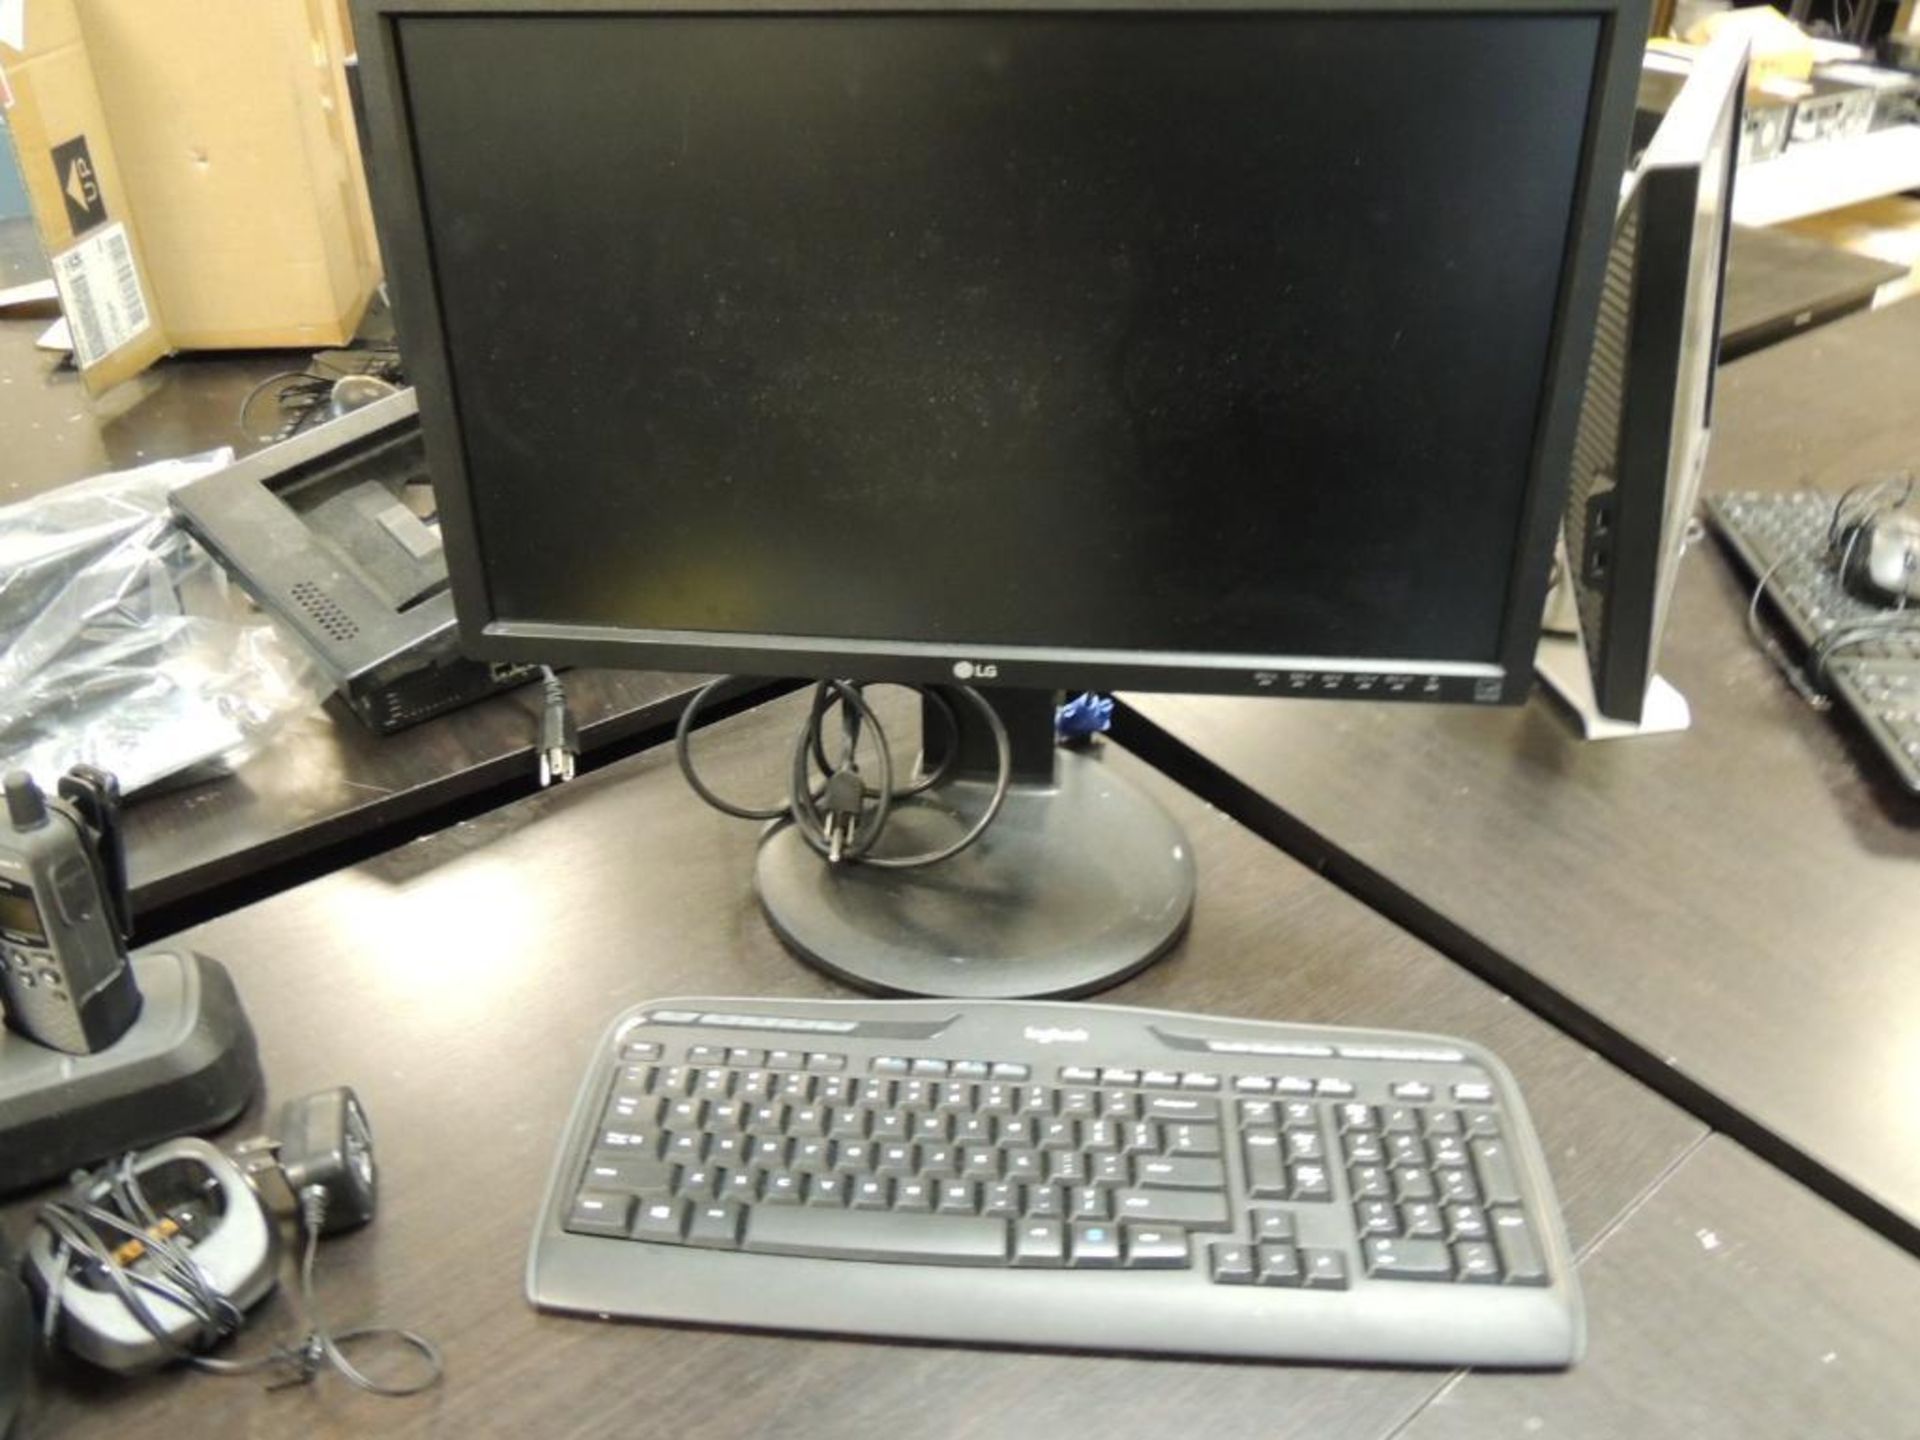 LOT: Monitors including (2) LG, (1) Acer, (1) Dell, with Keyboards & Mouses